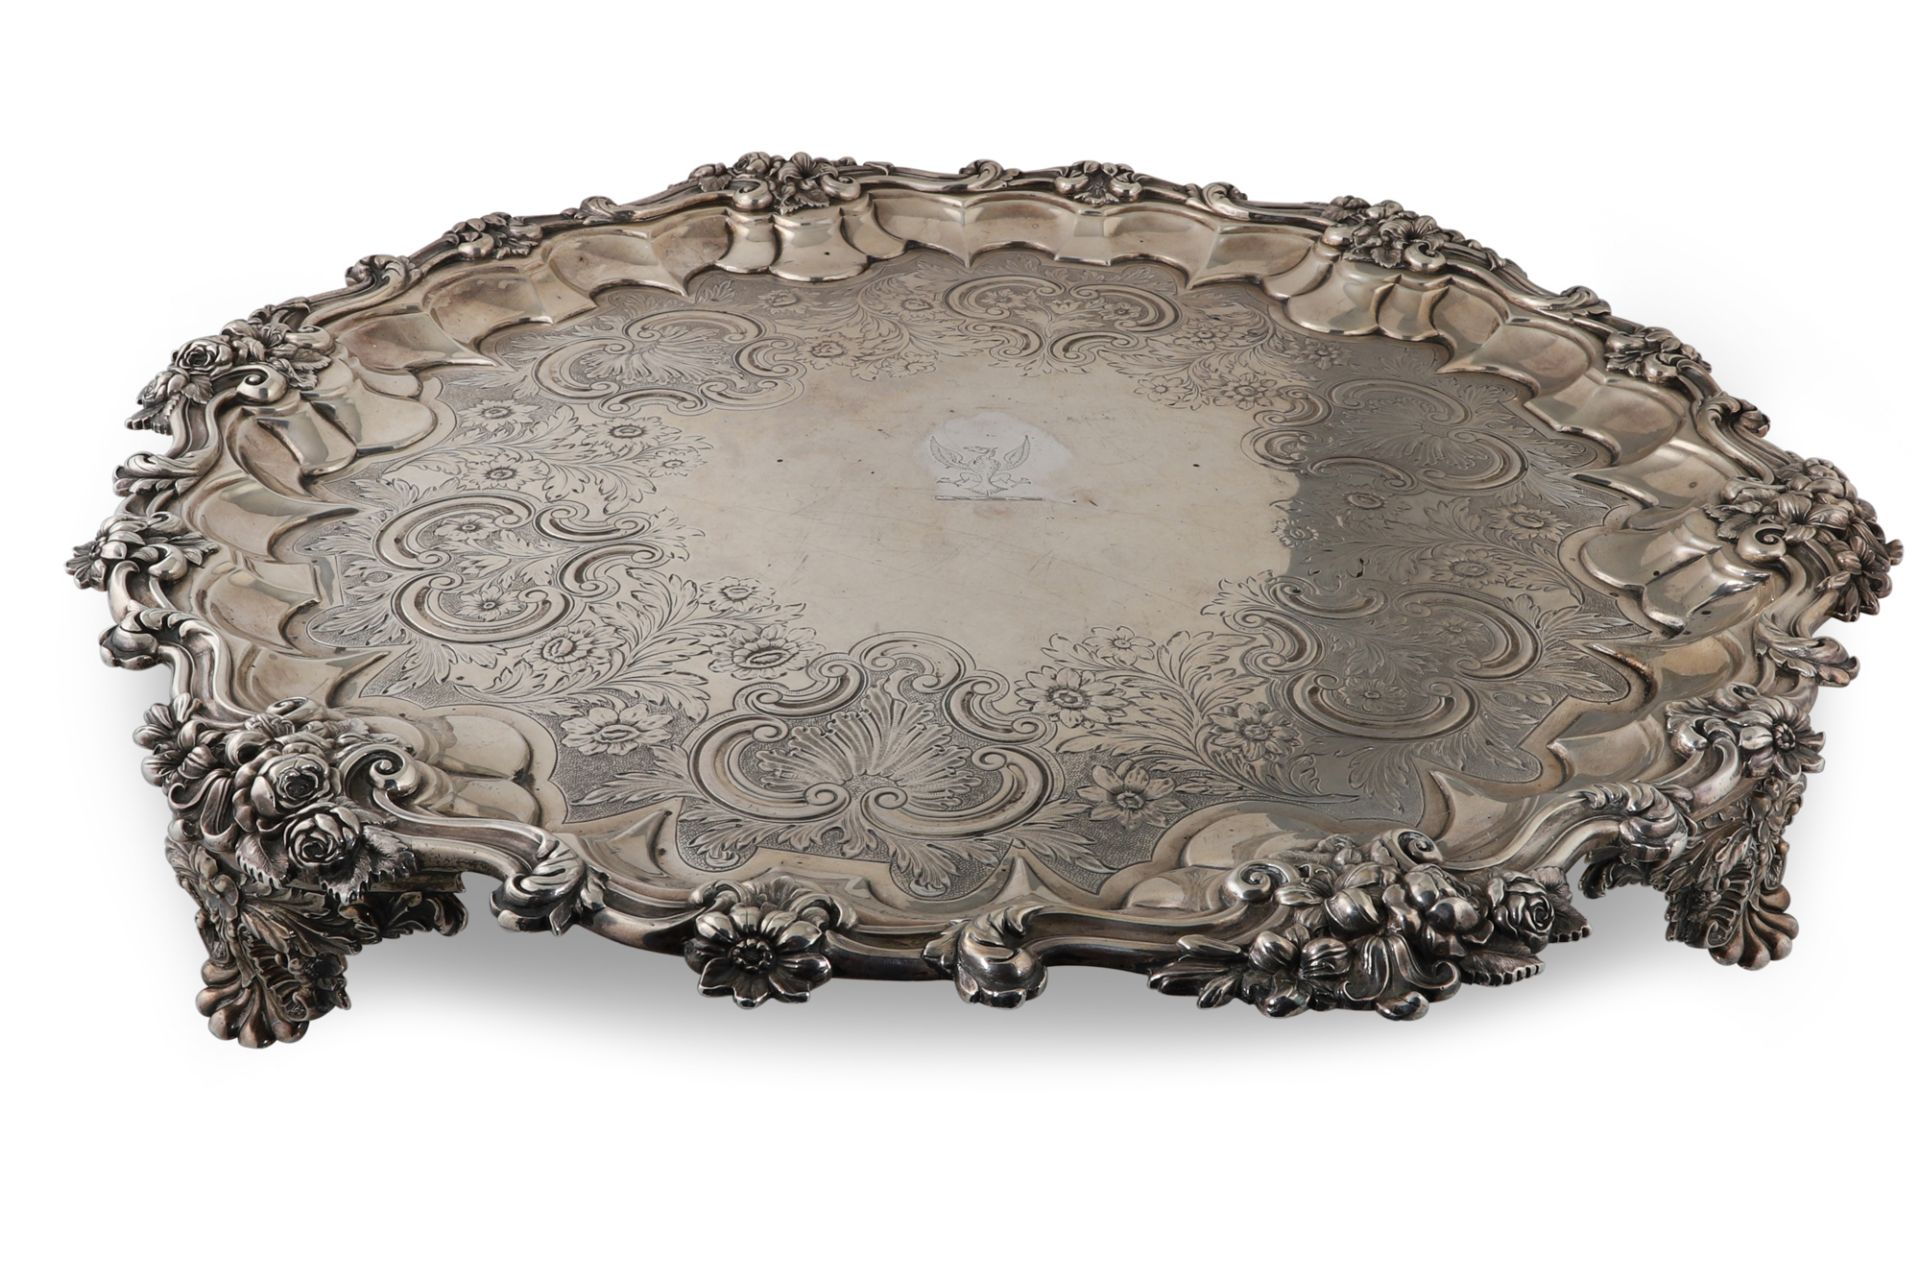 AN IMPRESSIVE WILLIAM IV CIRCULAR SILVER SALVER, with chased & engraved floral decoration, raised